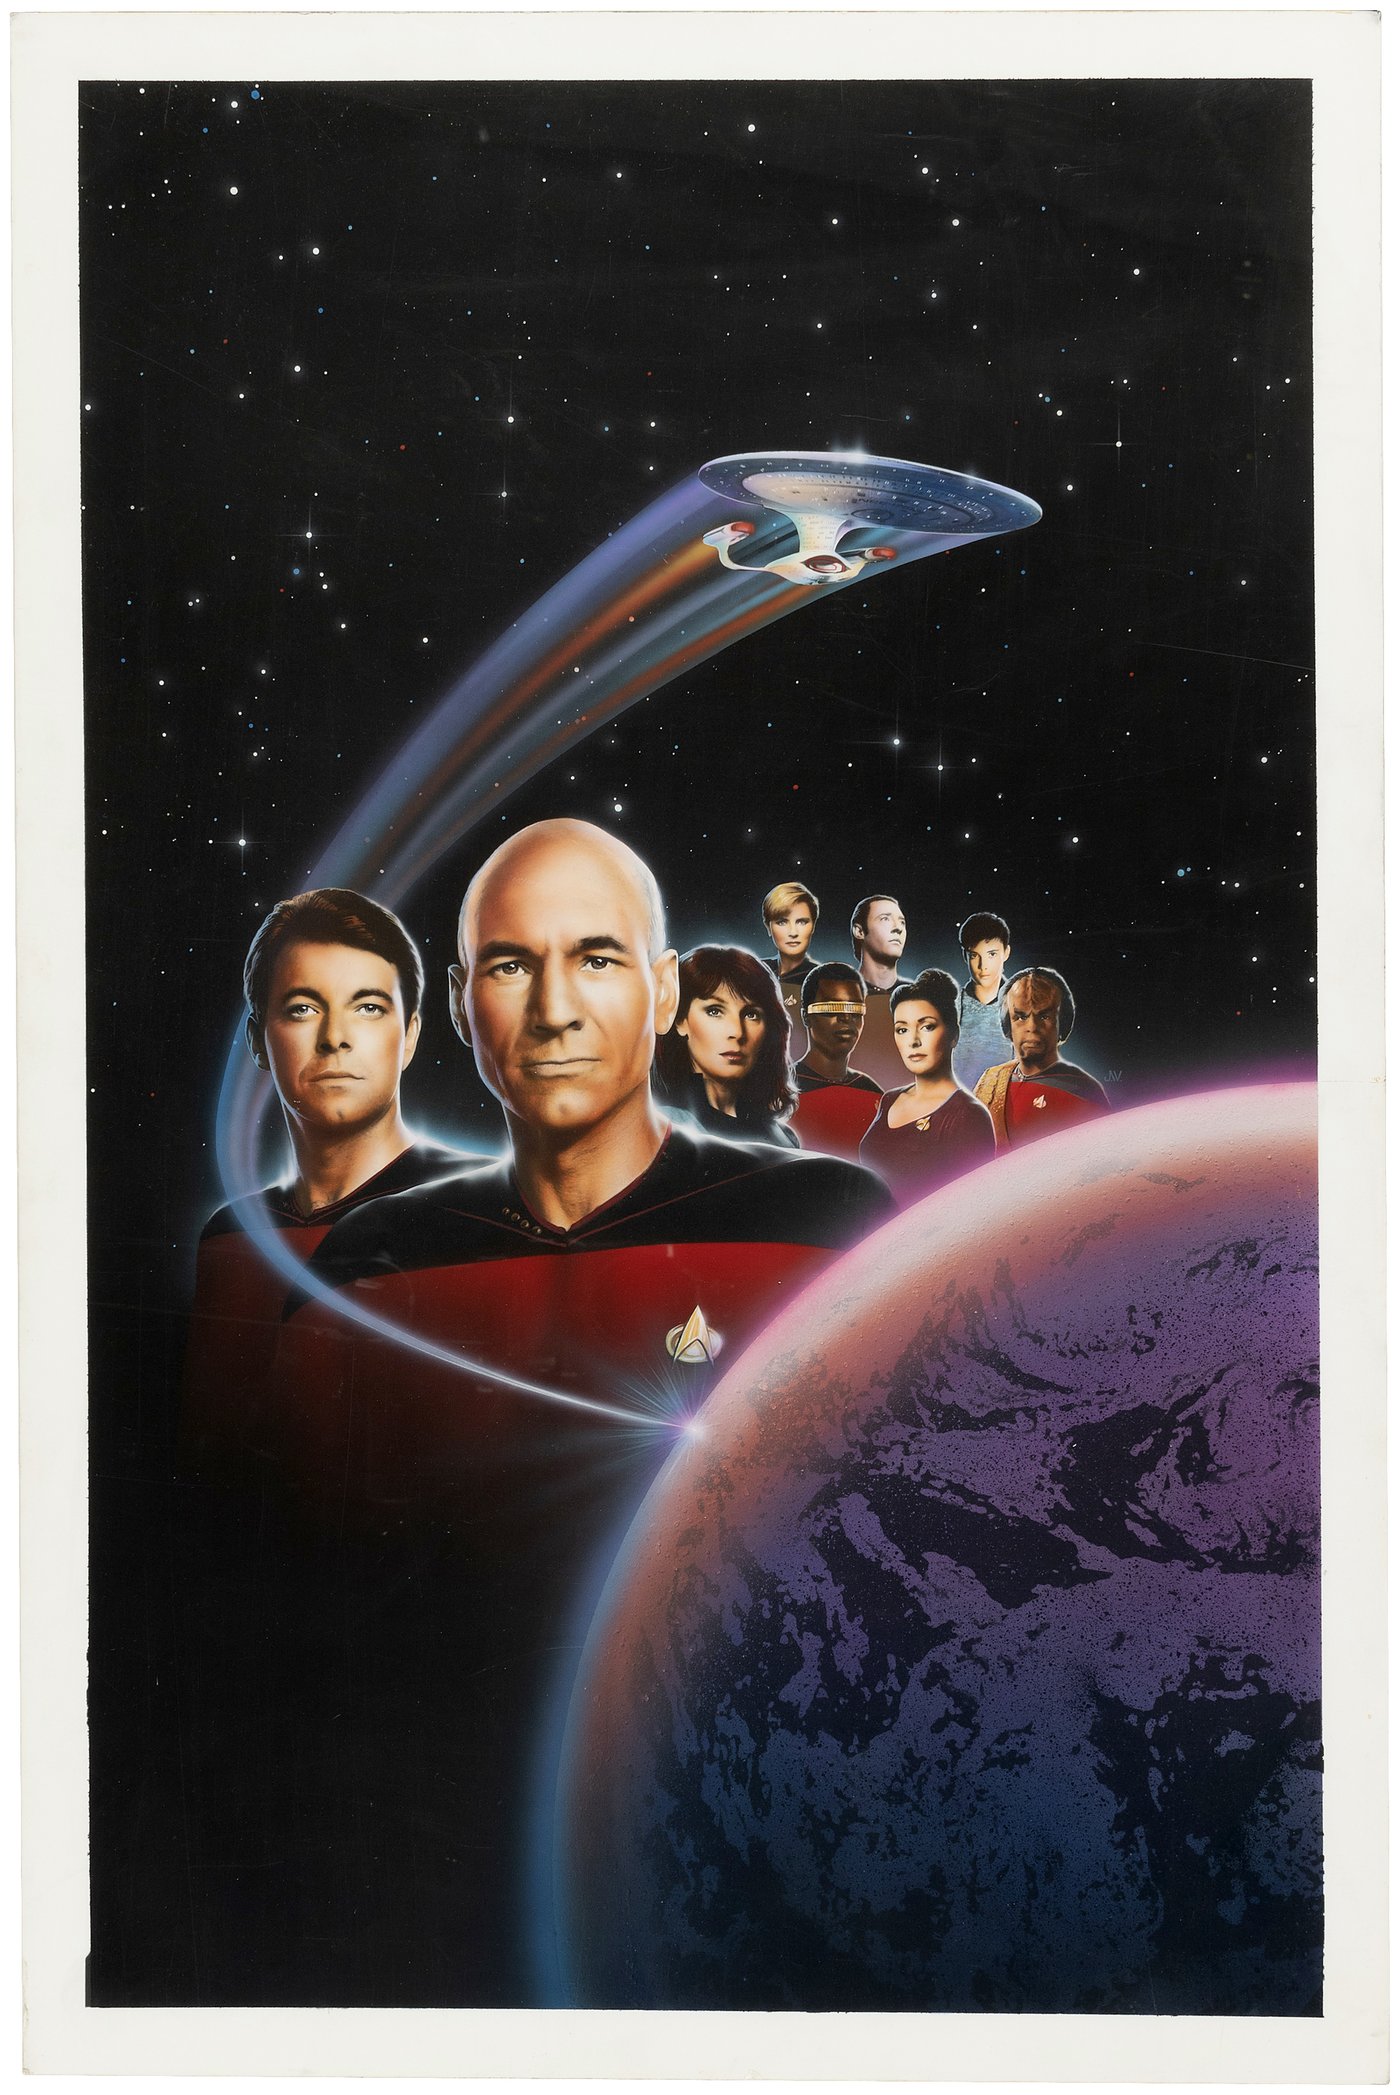 Hake's - STAR TREK: THE NEXT GENERATION - THE COLLECTOR'S EDITION 